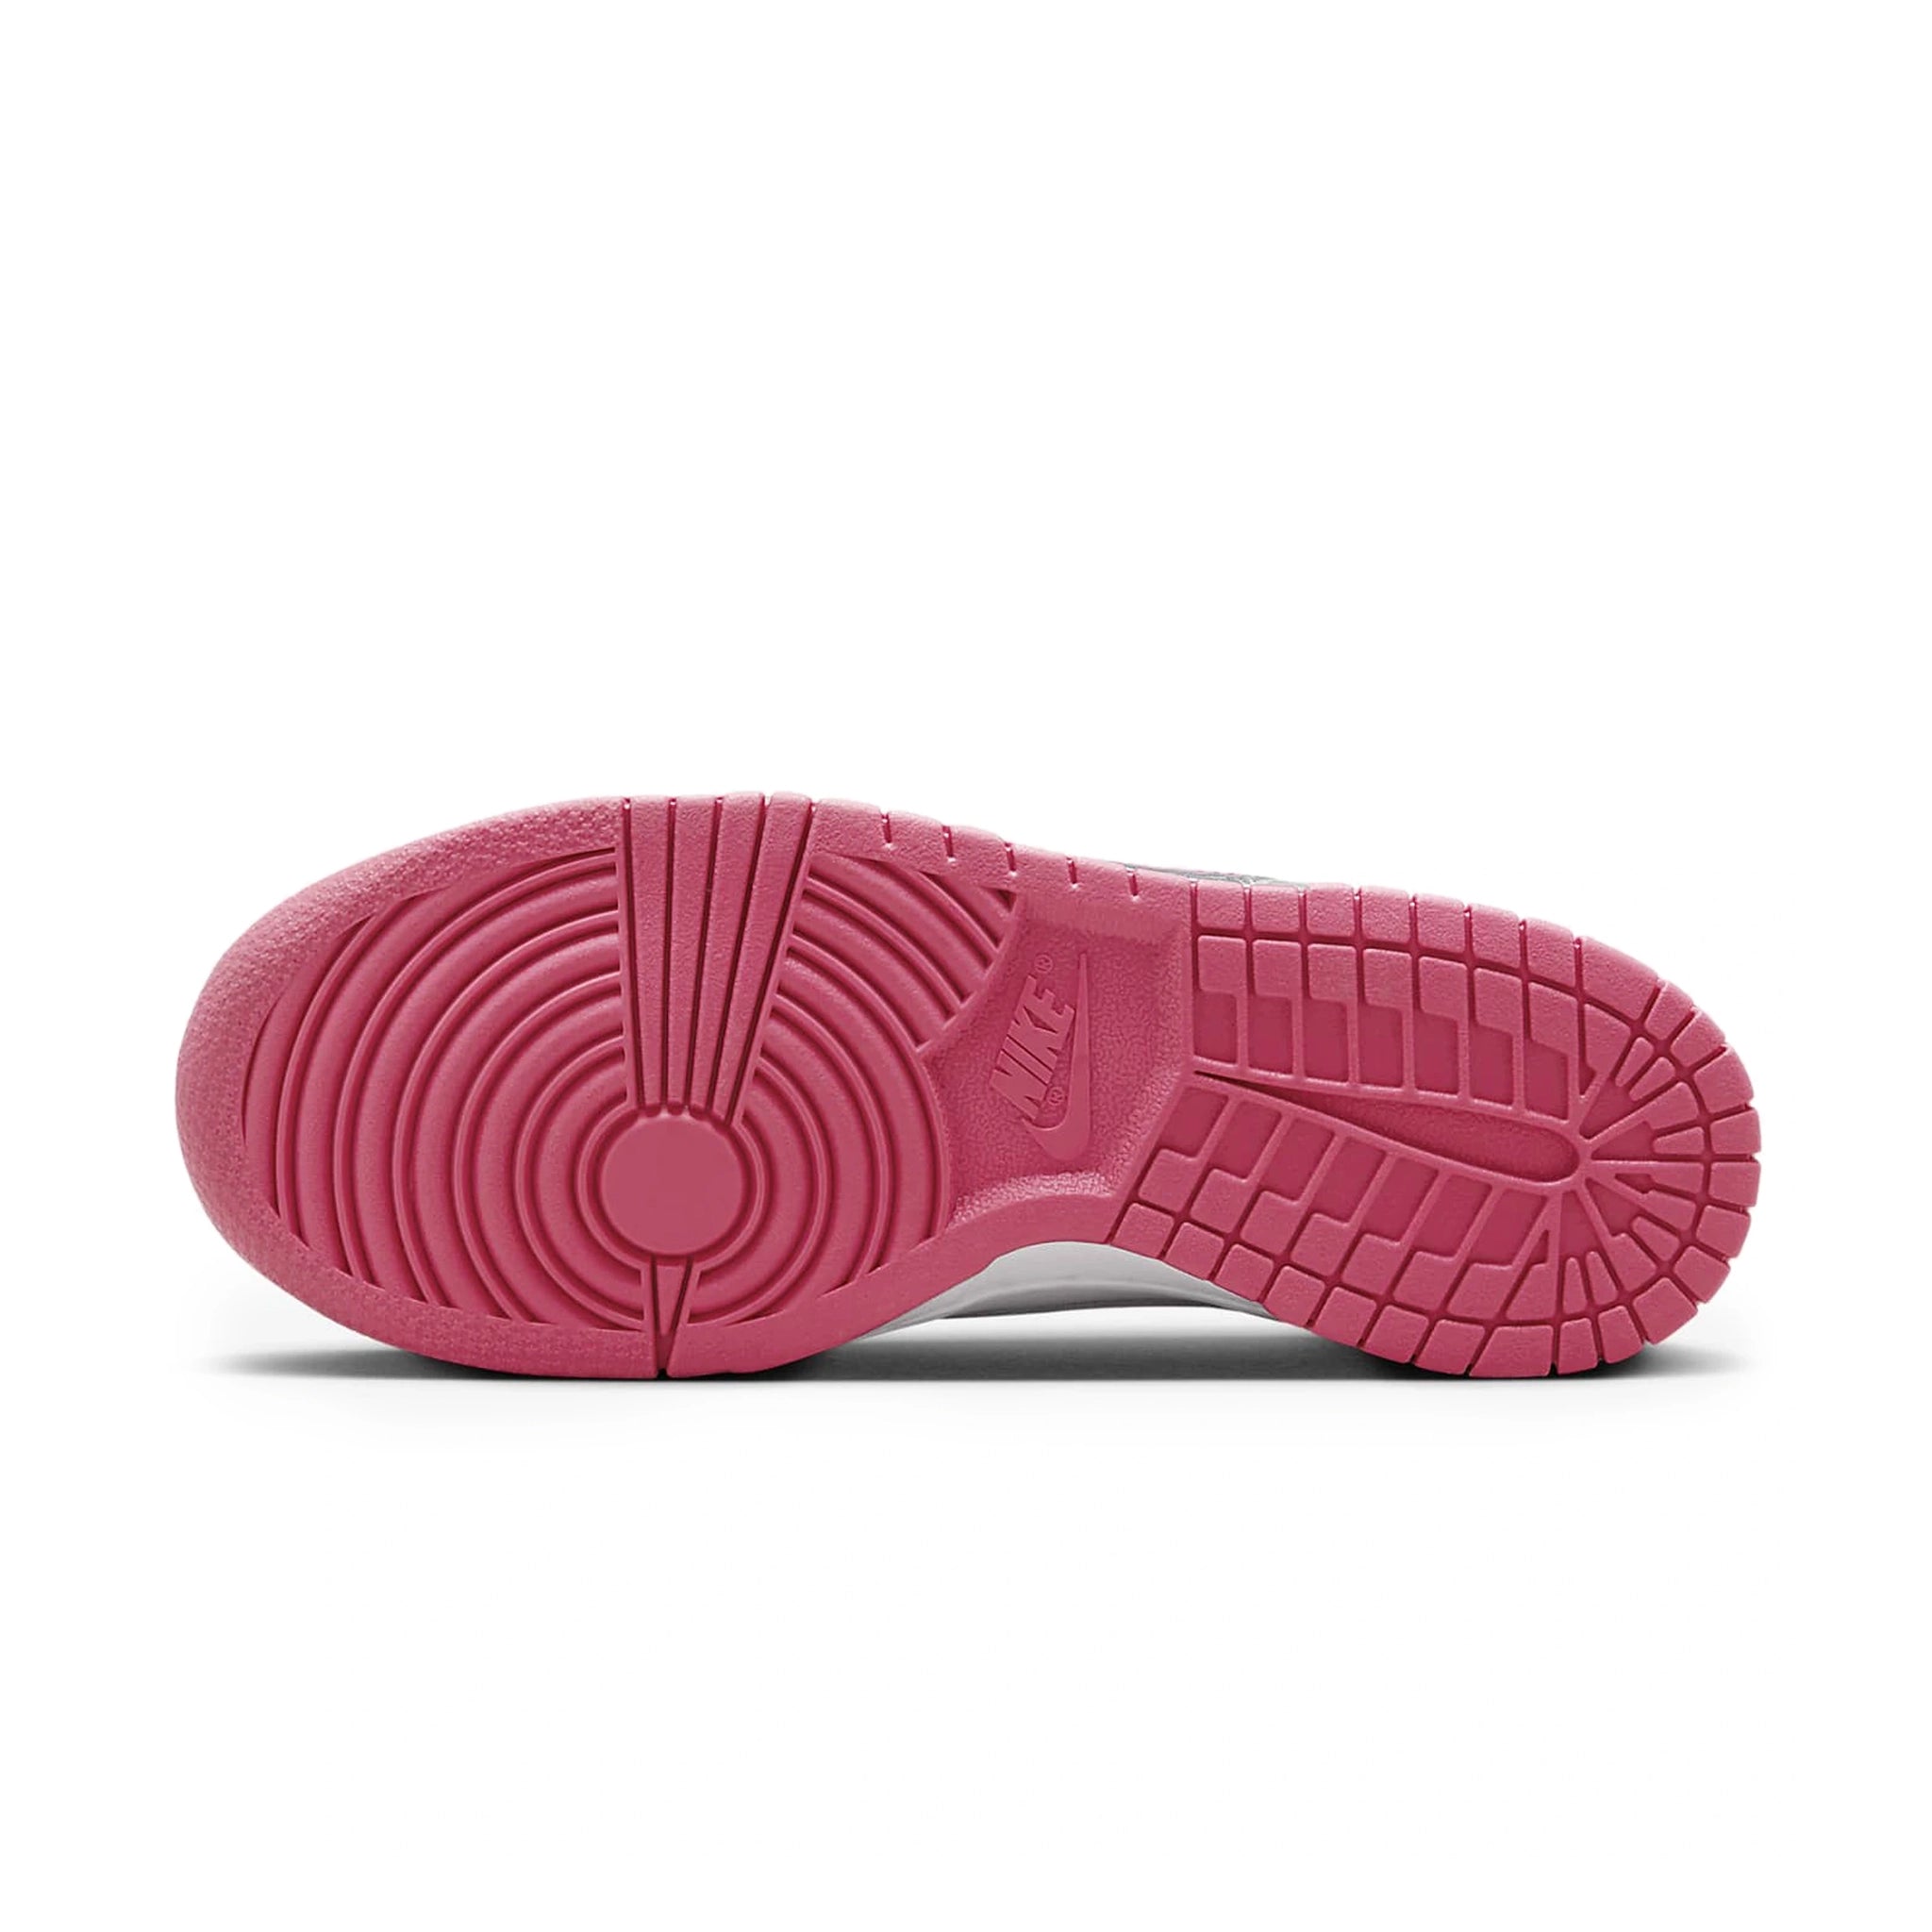 Sole view of Nike Dunk Low Laser Fuchsia (GS) FB9109-102